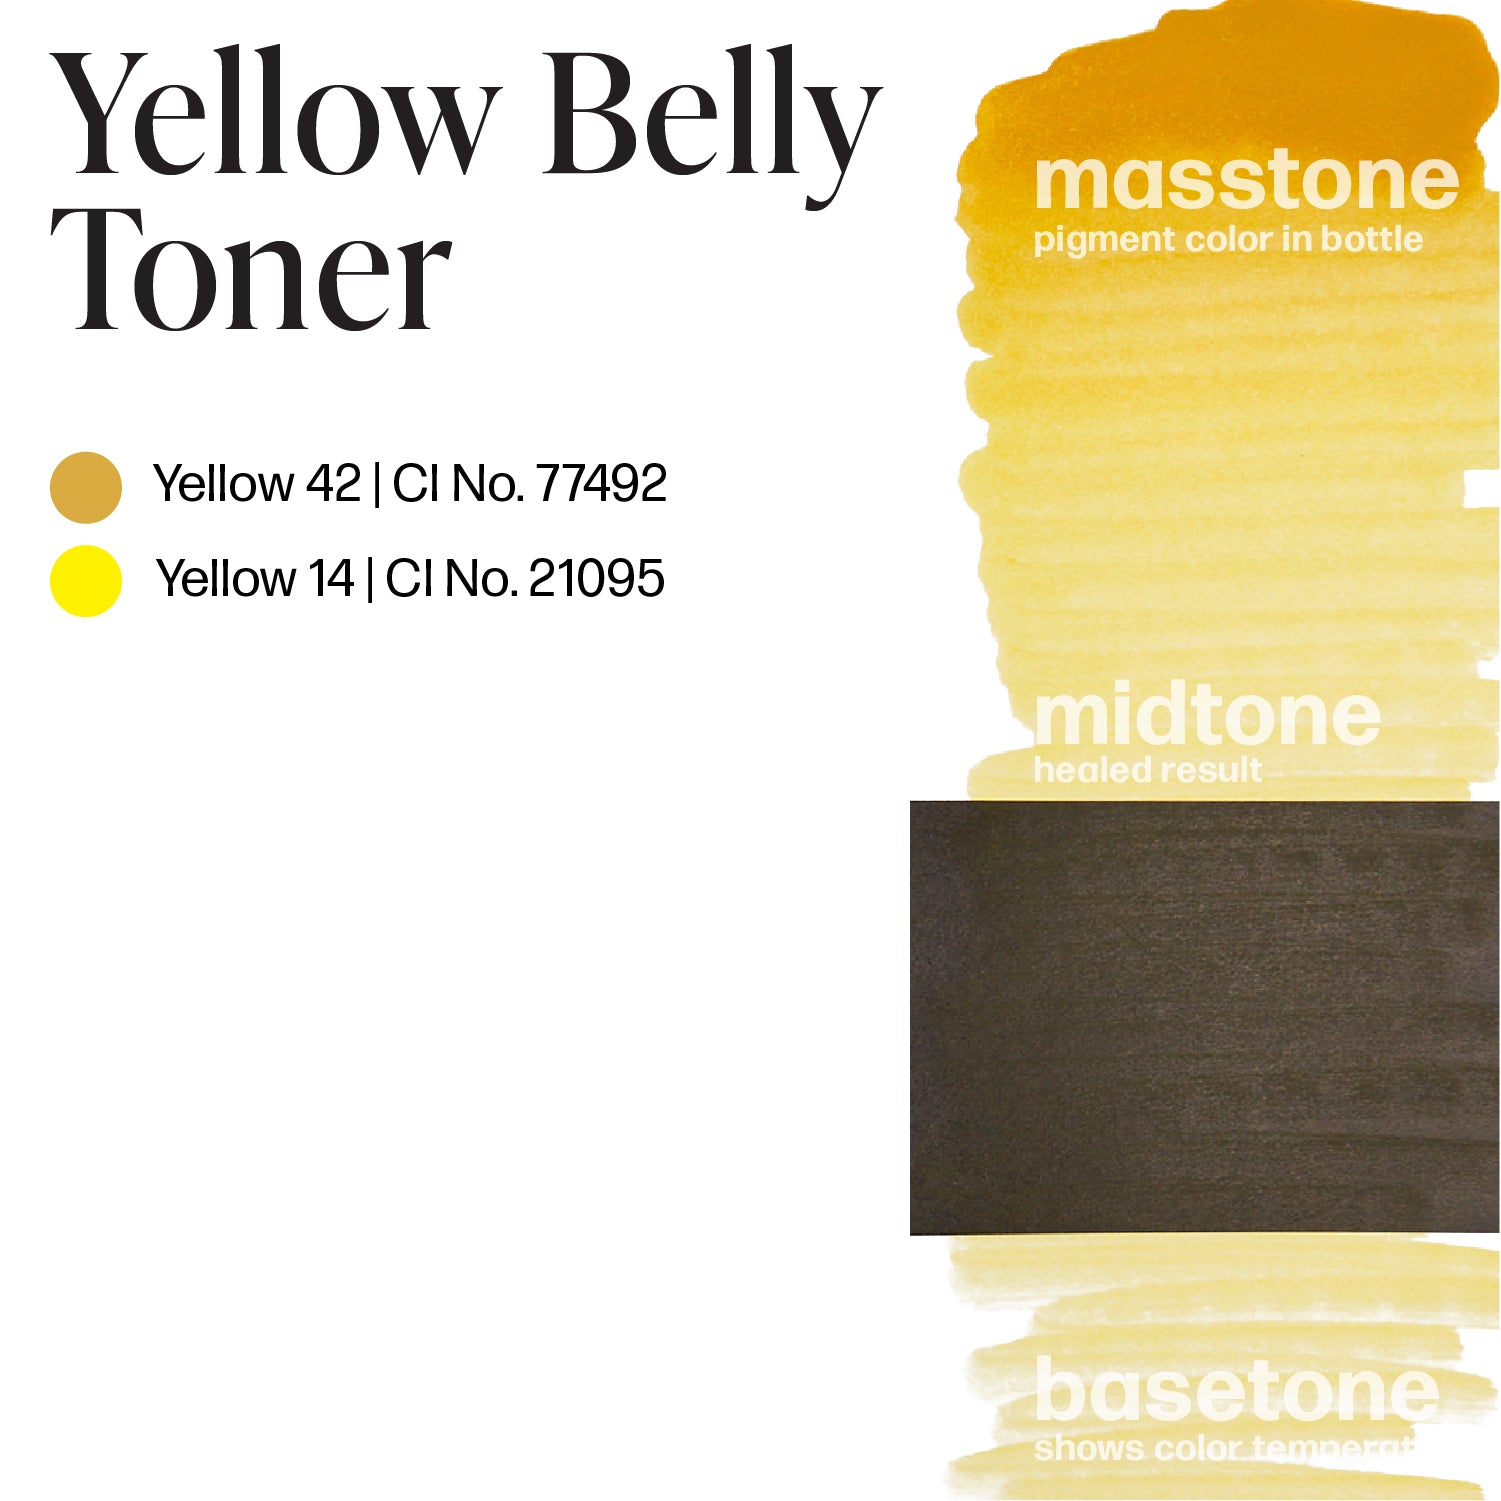 Perma Blend - Yellow Belly Toner - Ultimate Tattoo Supply